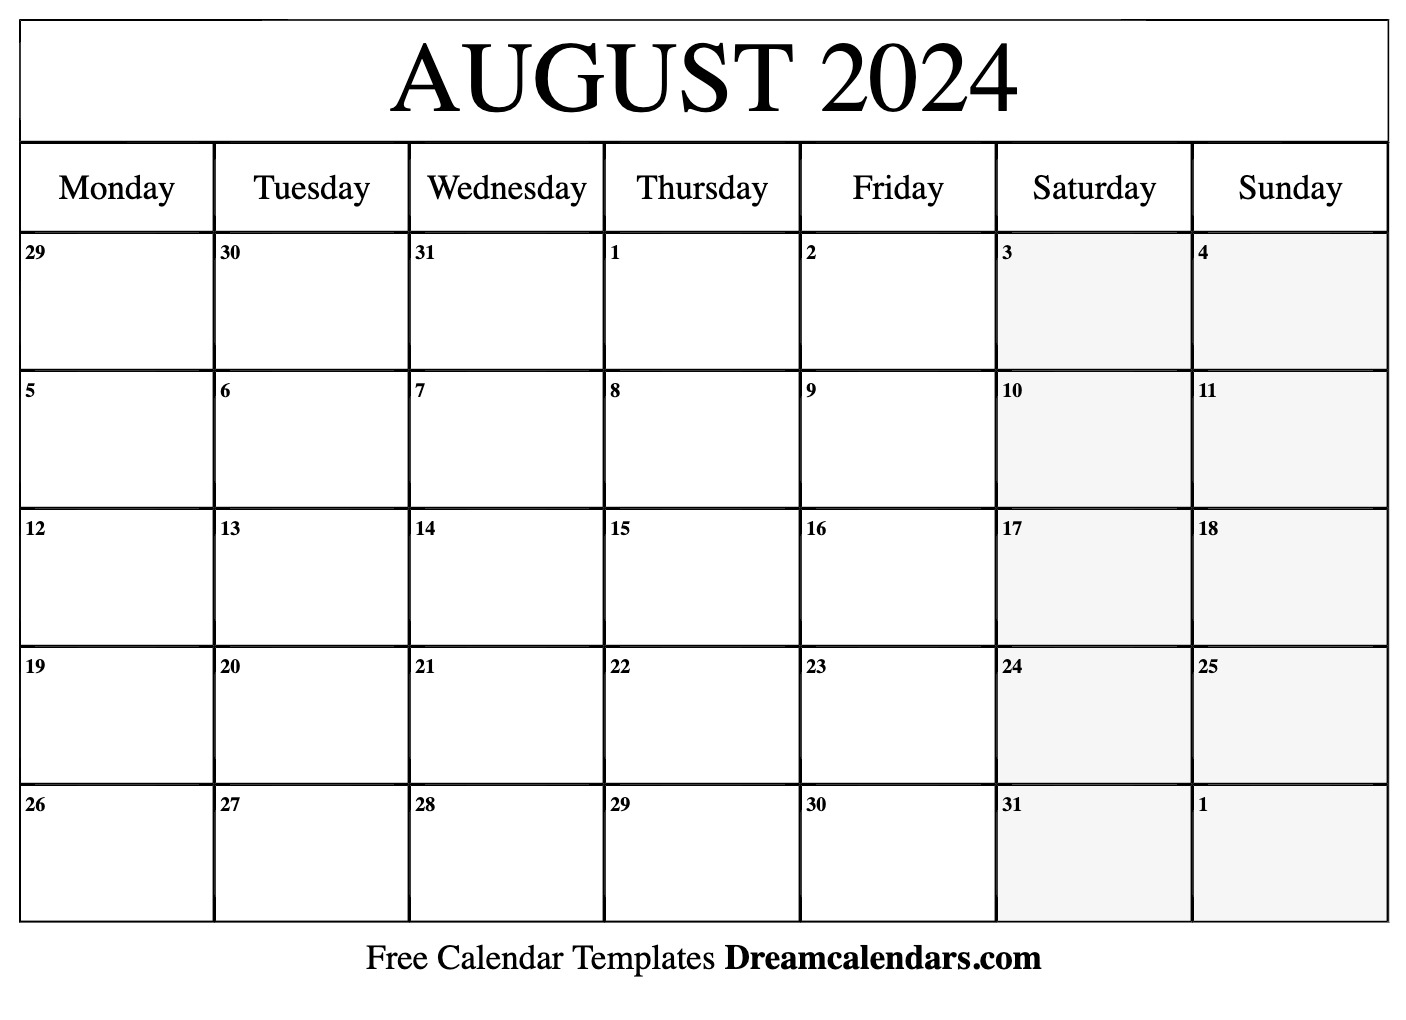 August 2024 Calendar | Free Blank Printable With Holidays for Printable Calendar August 2024